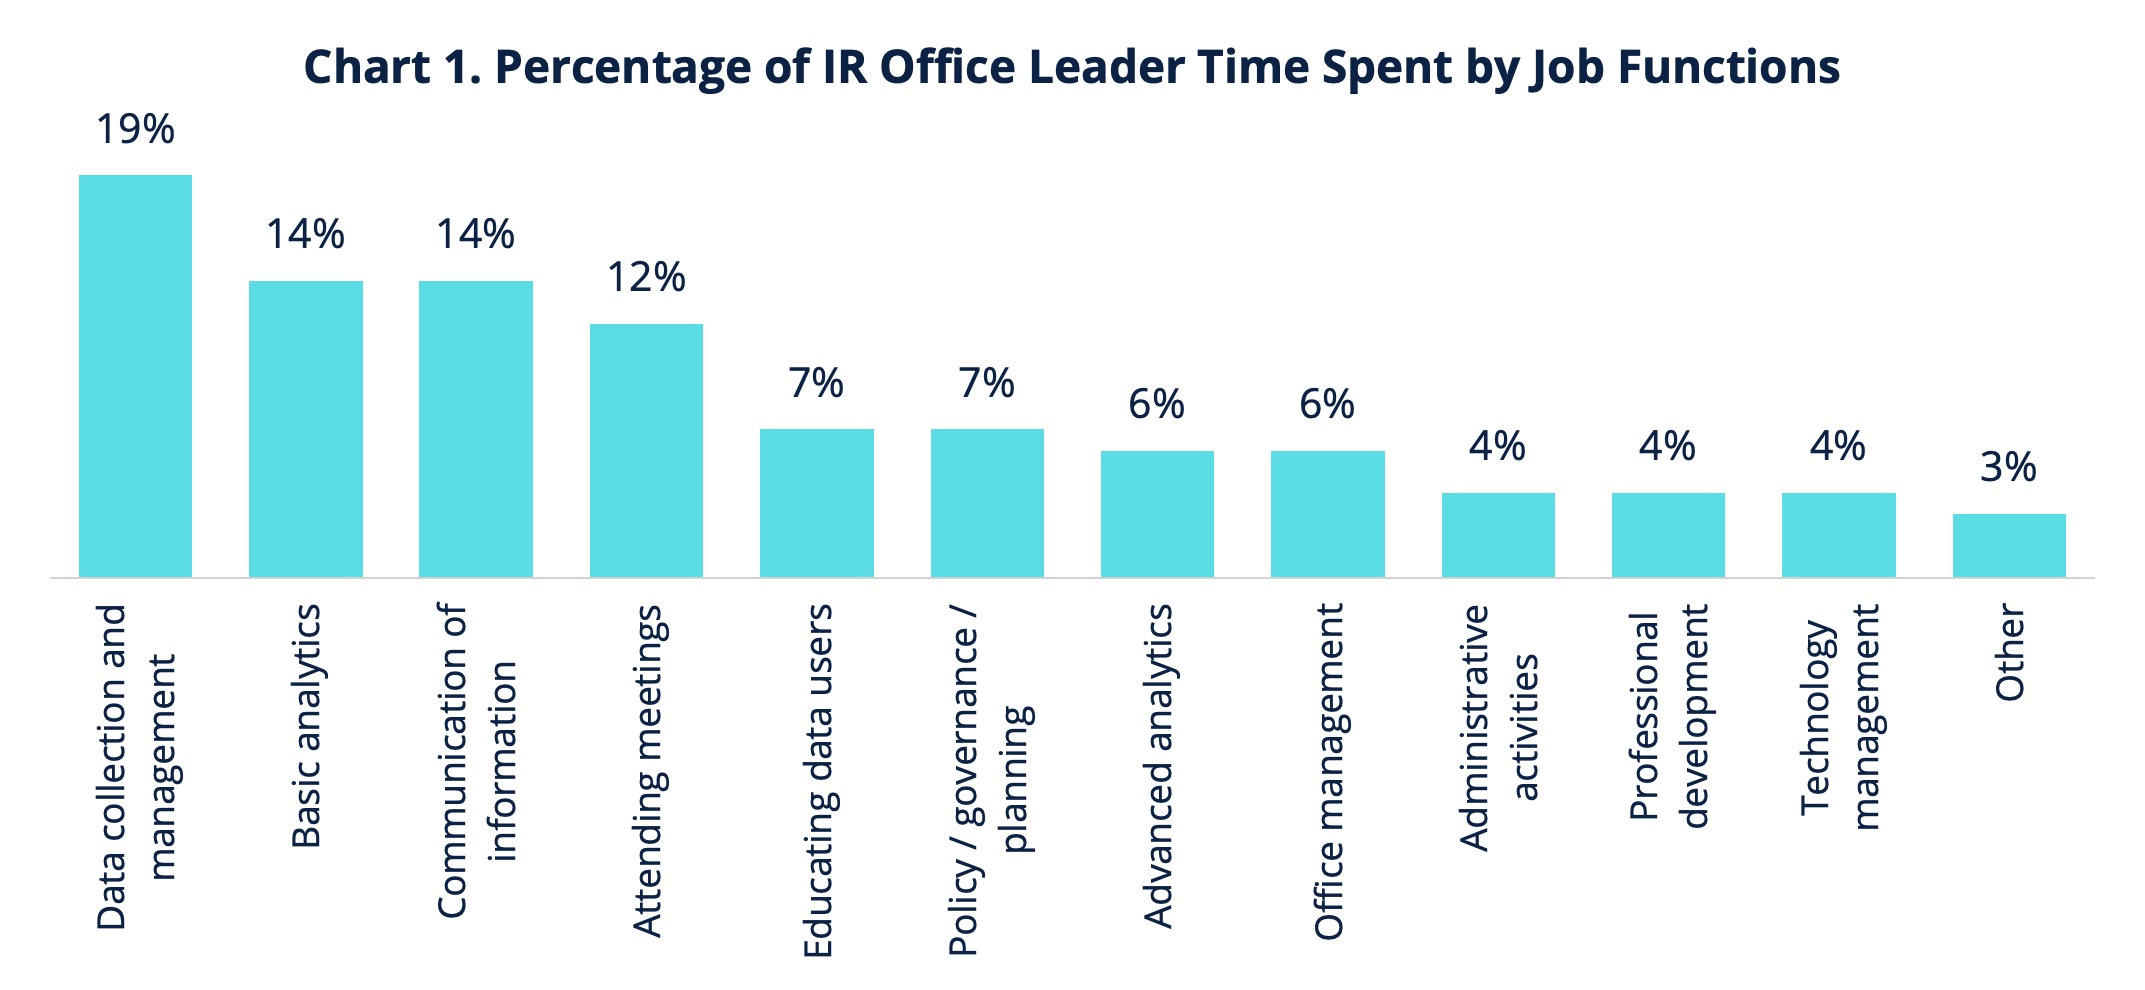 Chart 1. Percentage of IR Office Leader Time Spent by Job Functions